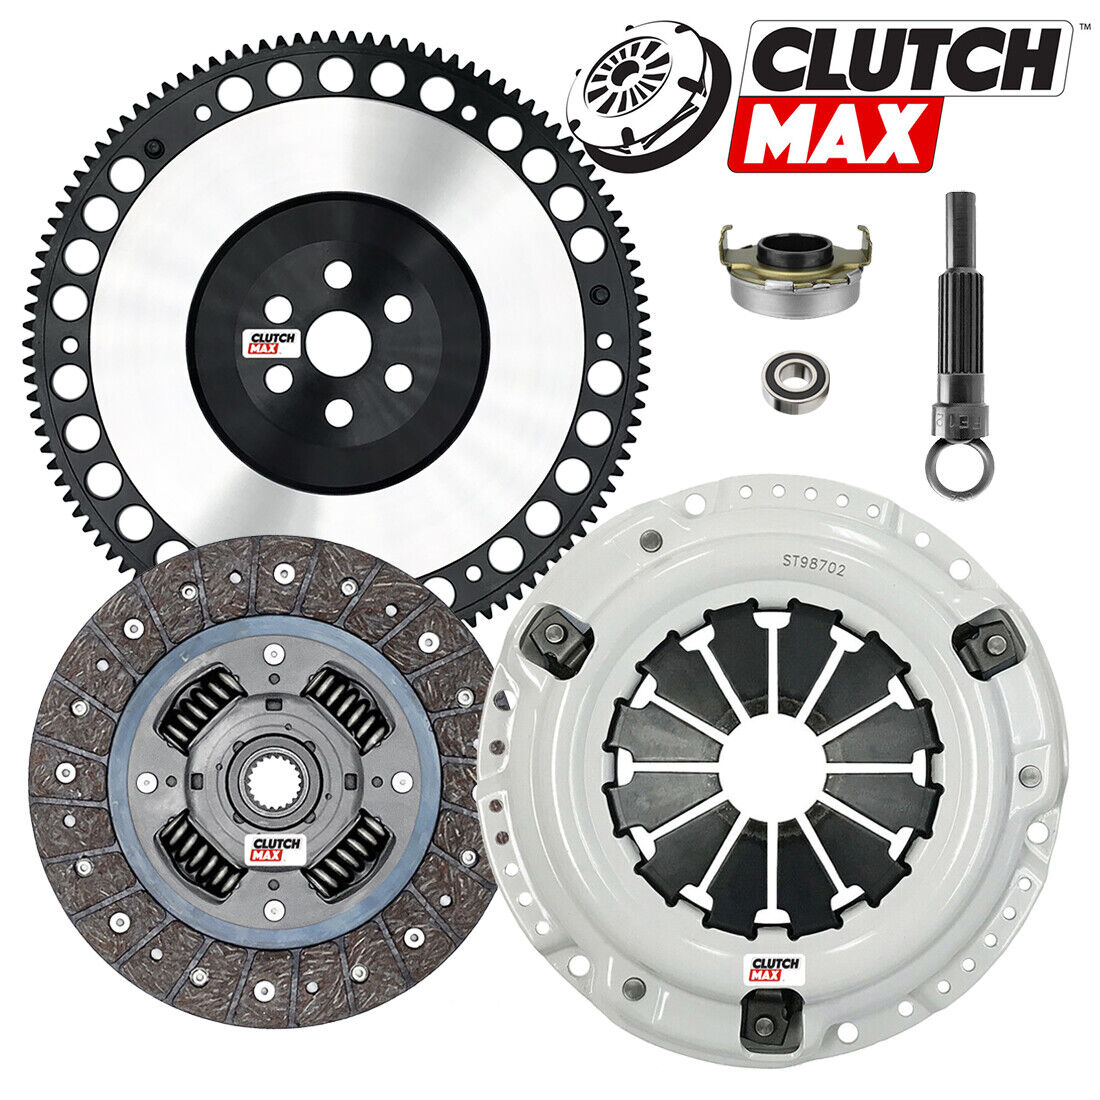 CM STAGE 1 HD CLUTCH KIT AND LIGHTWEIGHT FLYWHEEL for HONDA CIVIC D15 D16 D17